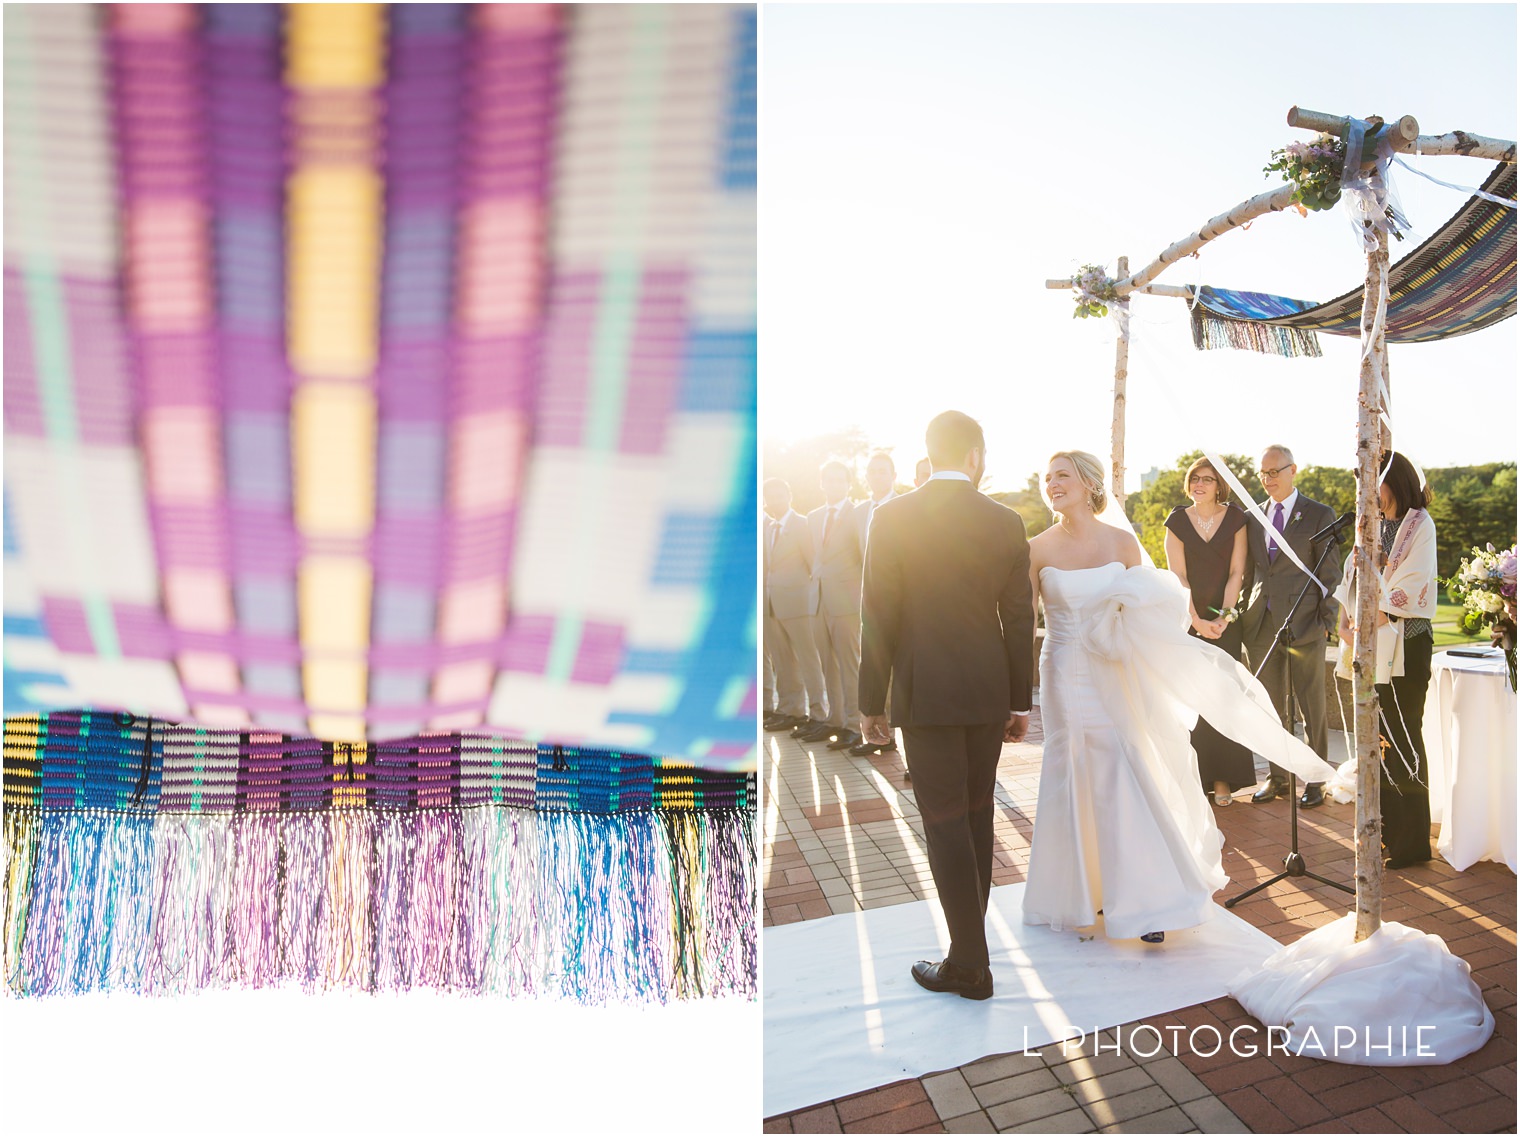 confetti wedding cake with sparklers,dylan,isabella,jewish wedding at the worlds fair pavilion,shades of lavender palette wedding colors,sparkler exit photos,summer wedding in st. louis in forest park,worlds fair pavilion wedding photos,